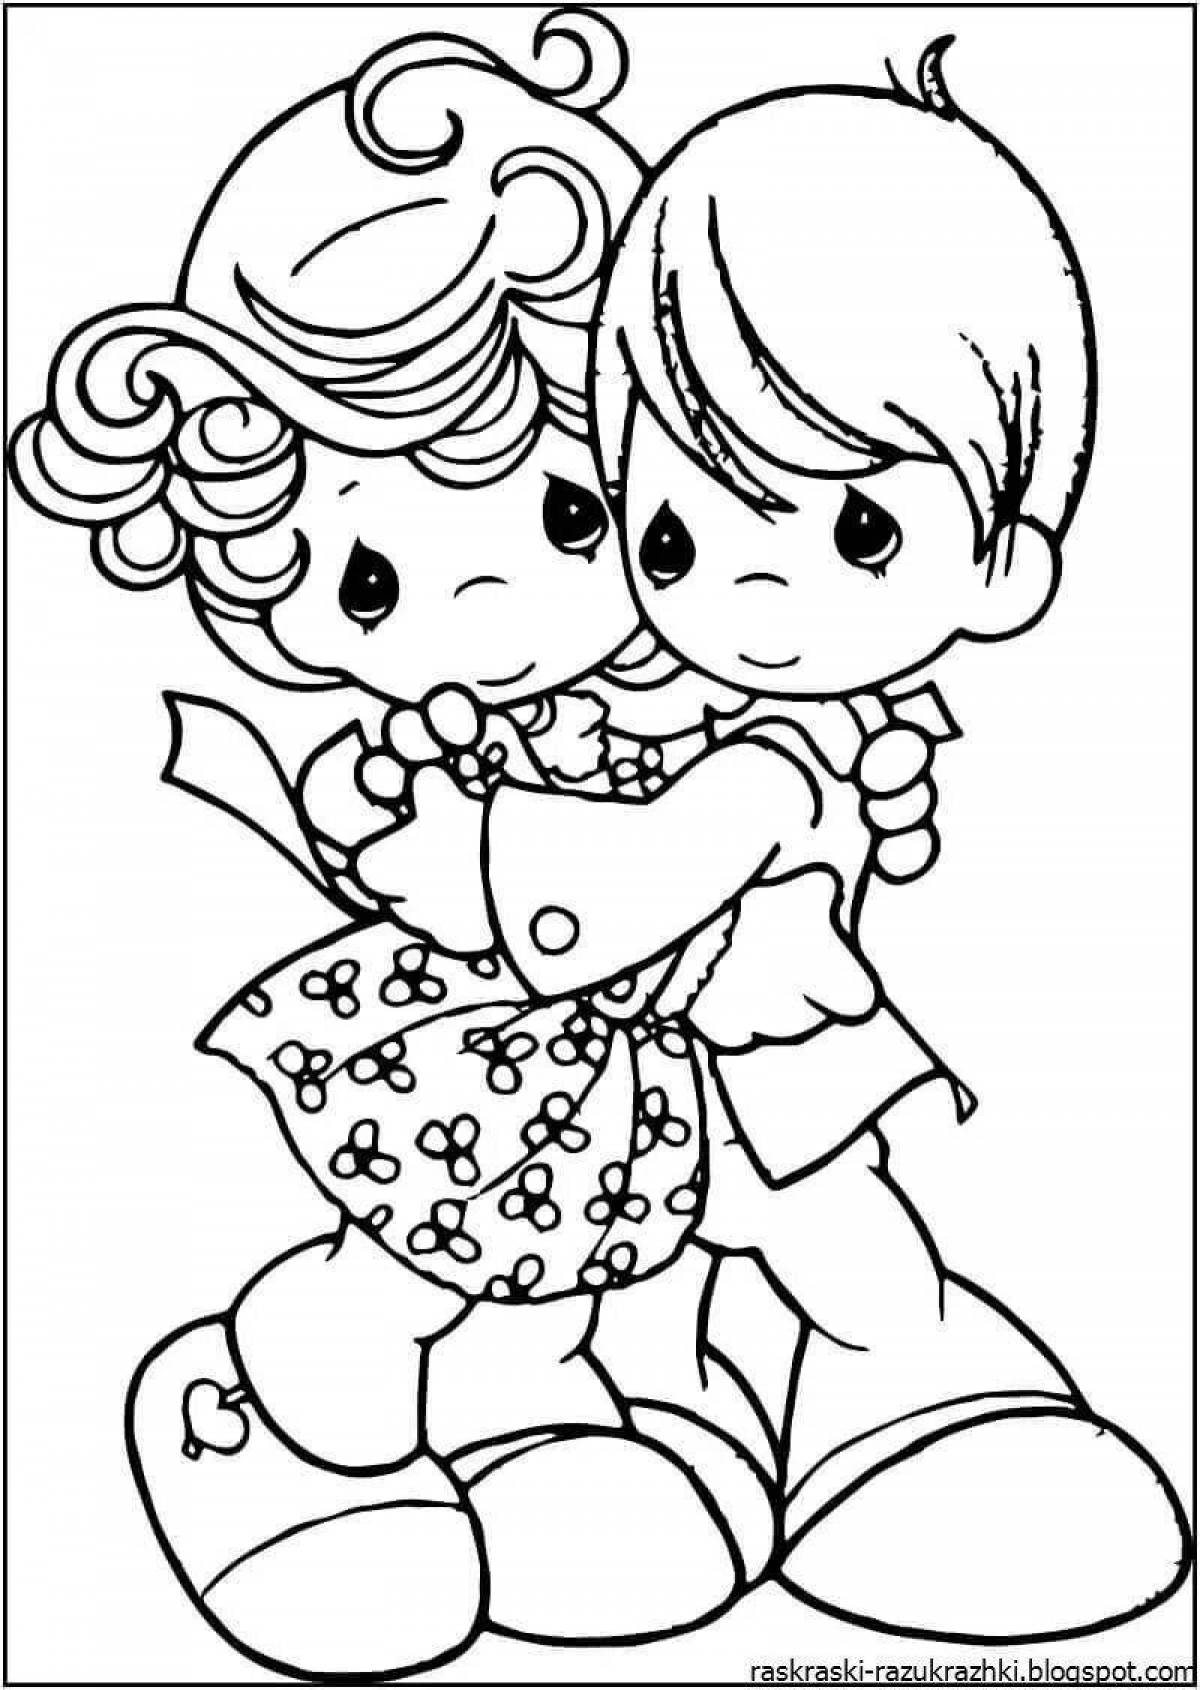 Zany hug day coloring book for kids